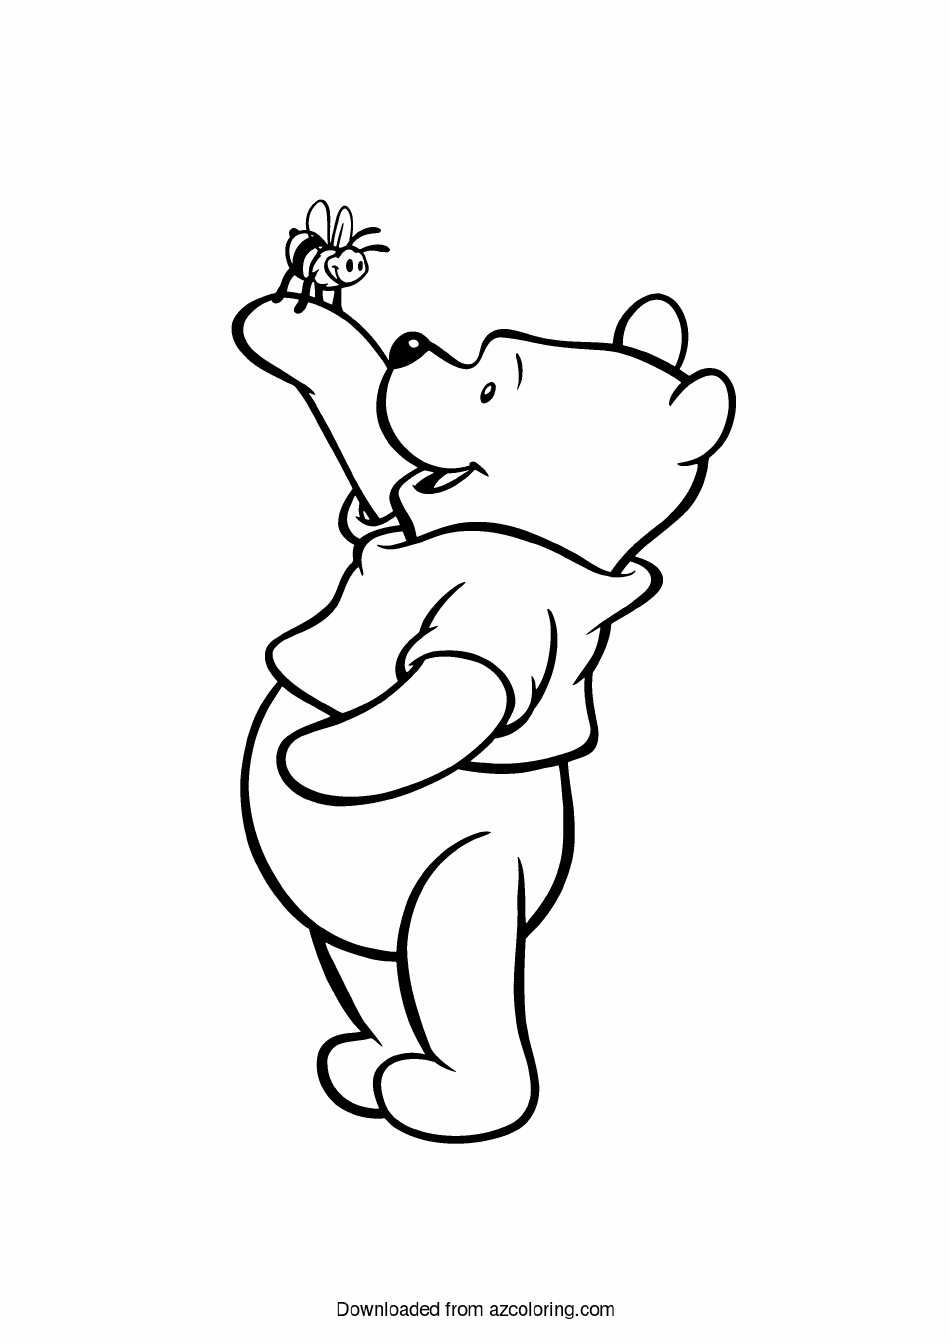 Winnie the Pooh Coloring Sheet Download Printable PDF | Templateroller